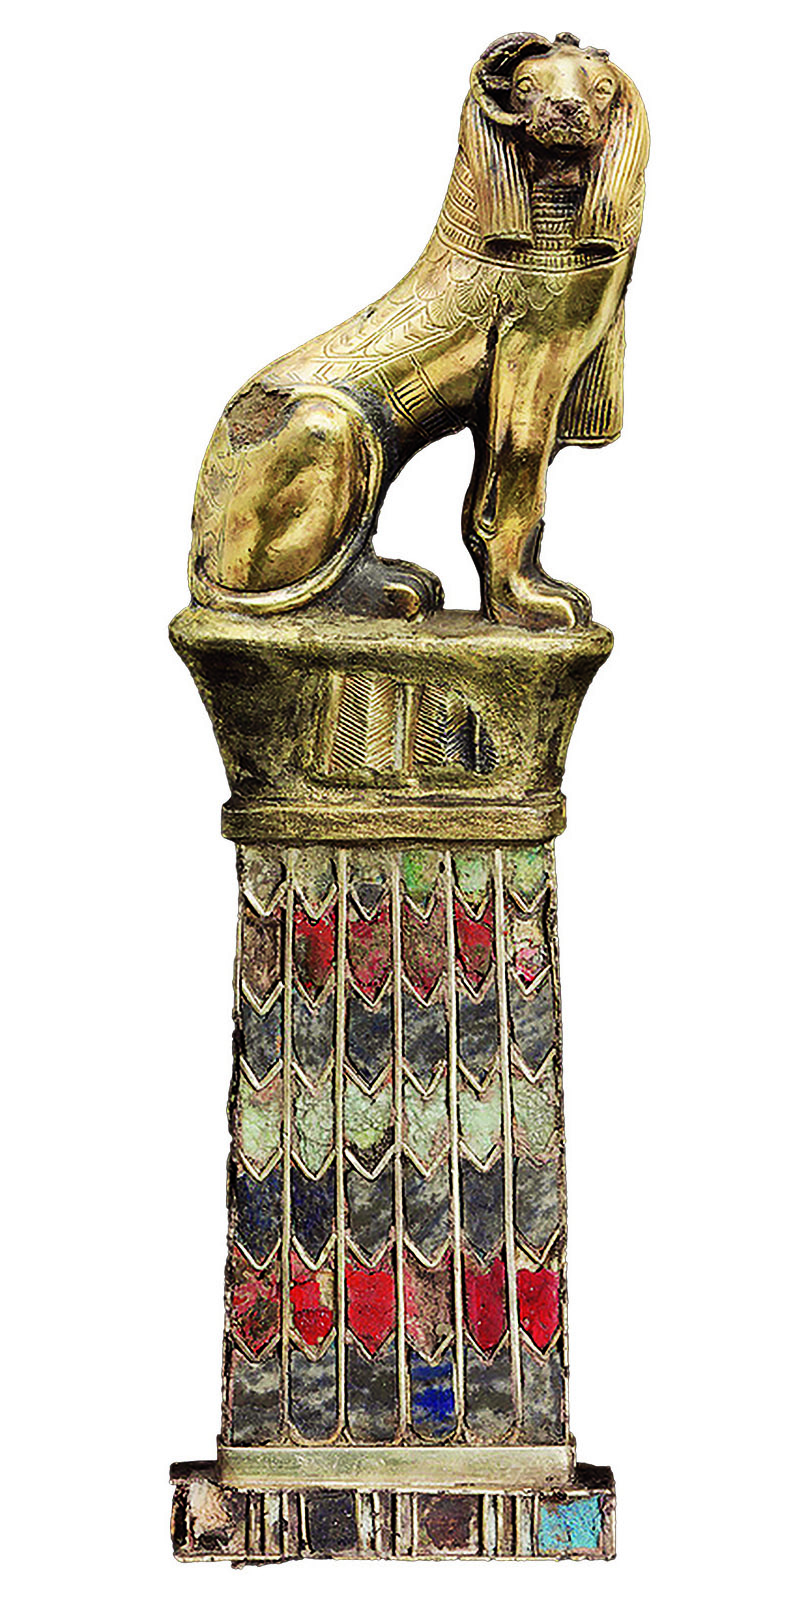 This pendant, with a gold, ram-headed sphinx atop a cloisonné pedestal of gilded silver, lapis lazuli and glass, was made during the reign of Piye or shortly thereafter, between 743 and 712 BCE.